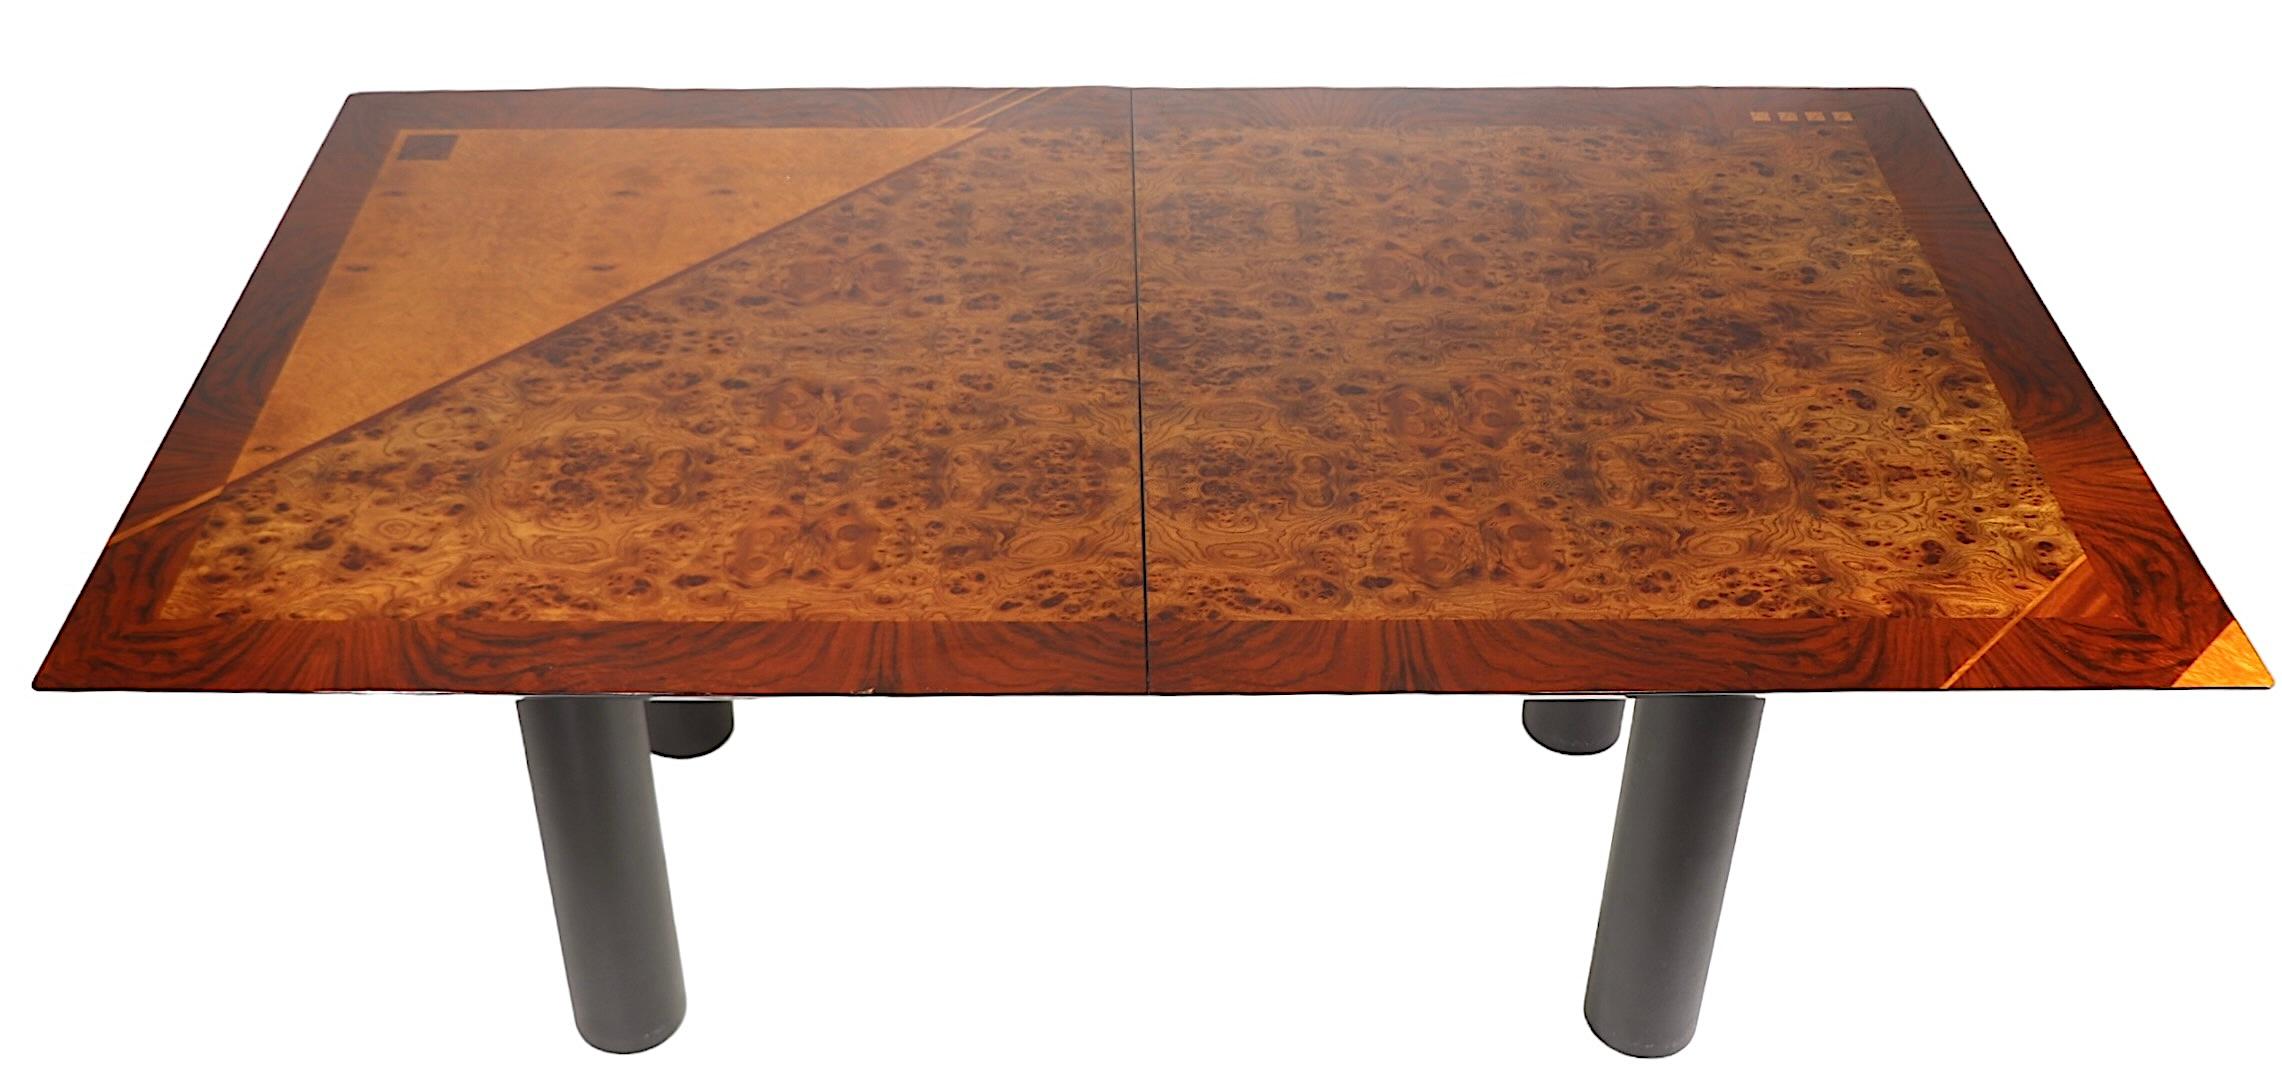 20th Century Italian Post Modern Dining Table by Oscar Dell Arredamento for Miniforms c 1970s For Sale